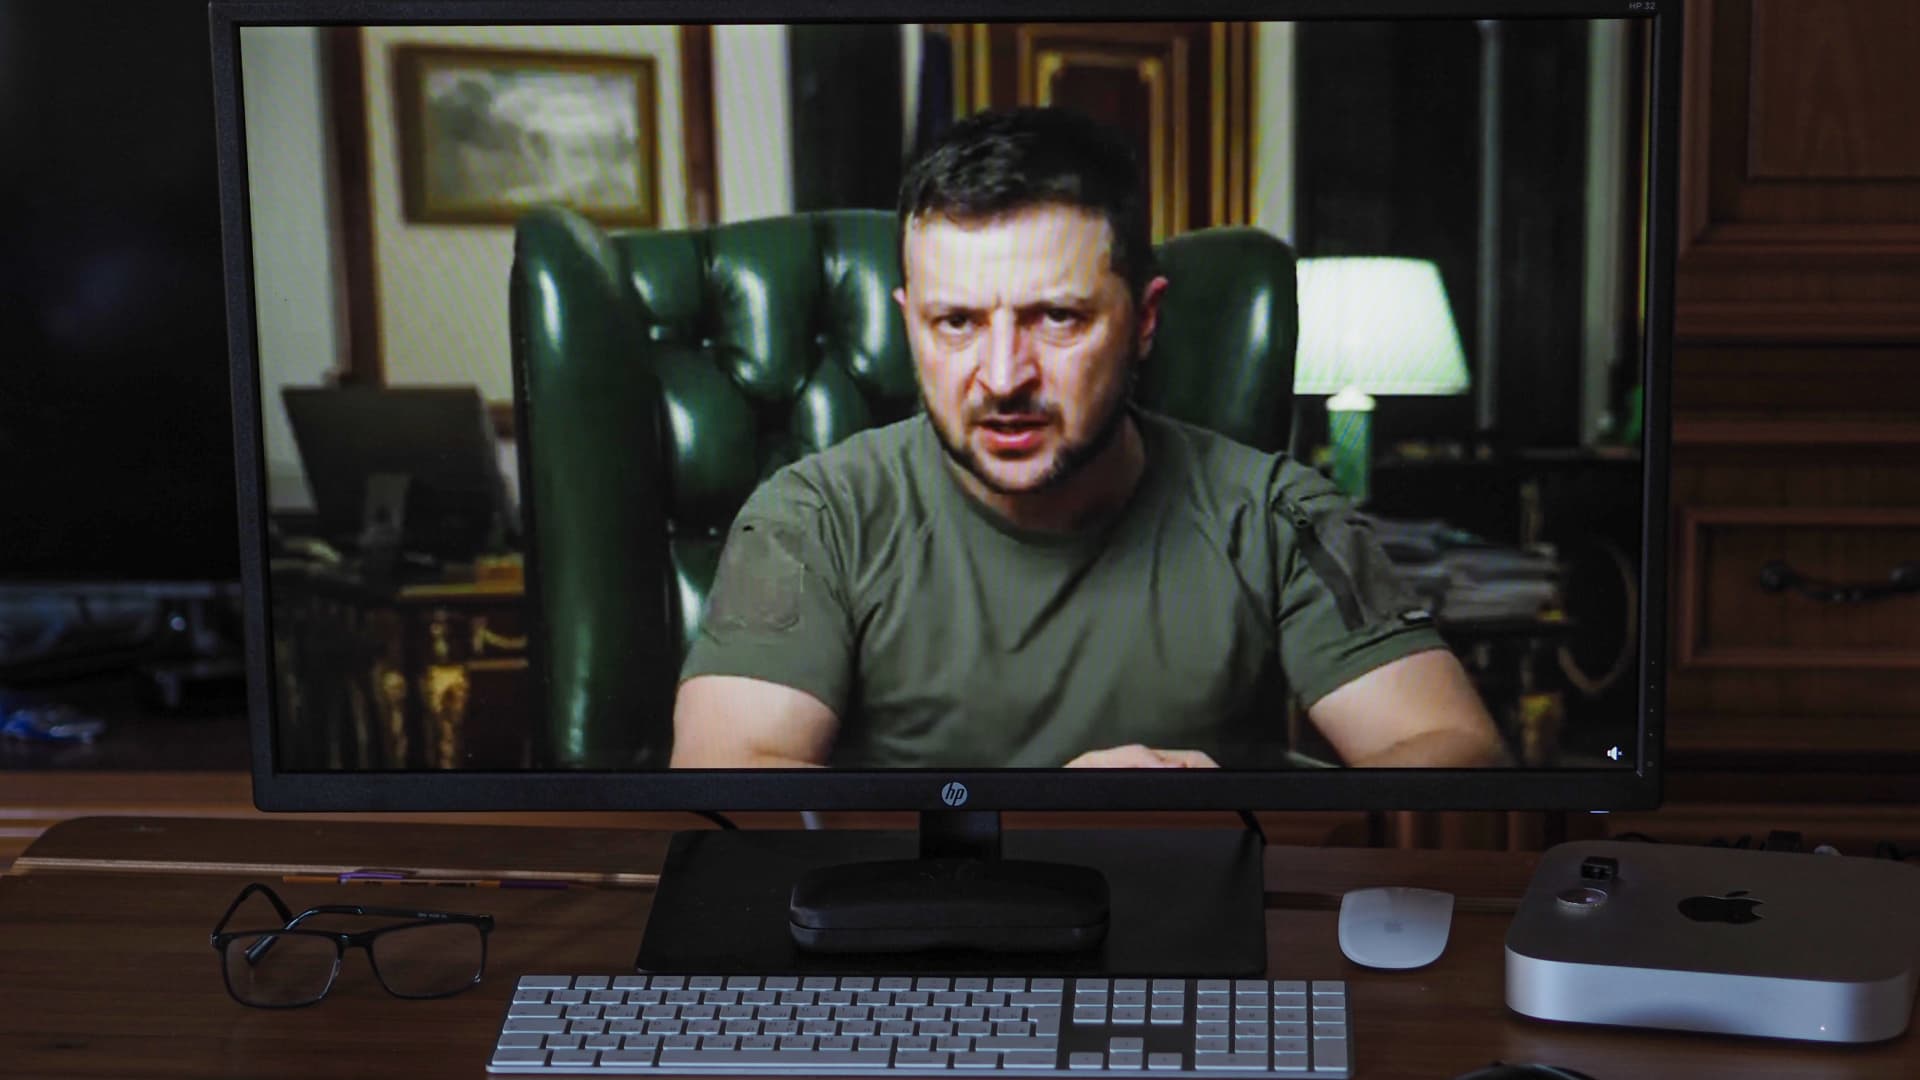 A screen shot showing the President of Ukraine Volodymyr Zelensky during his televised address where he said that if the Russian threat to shipping in the Black Sea can be removed, this will alleviate the severity of the global food crisis.